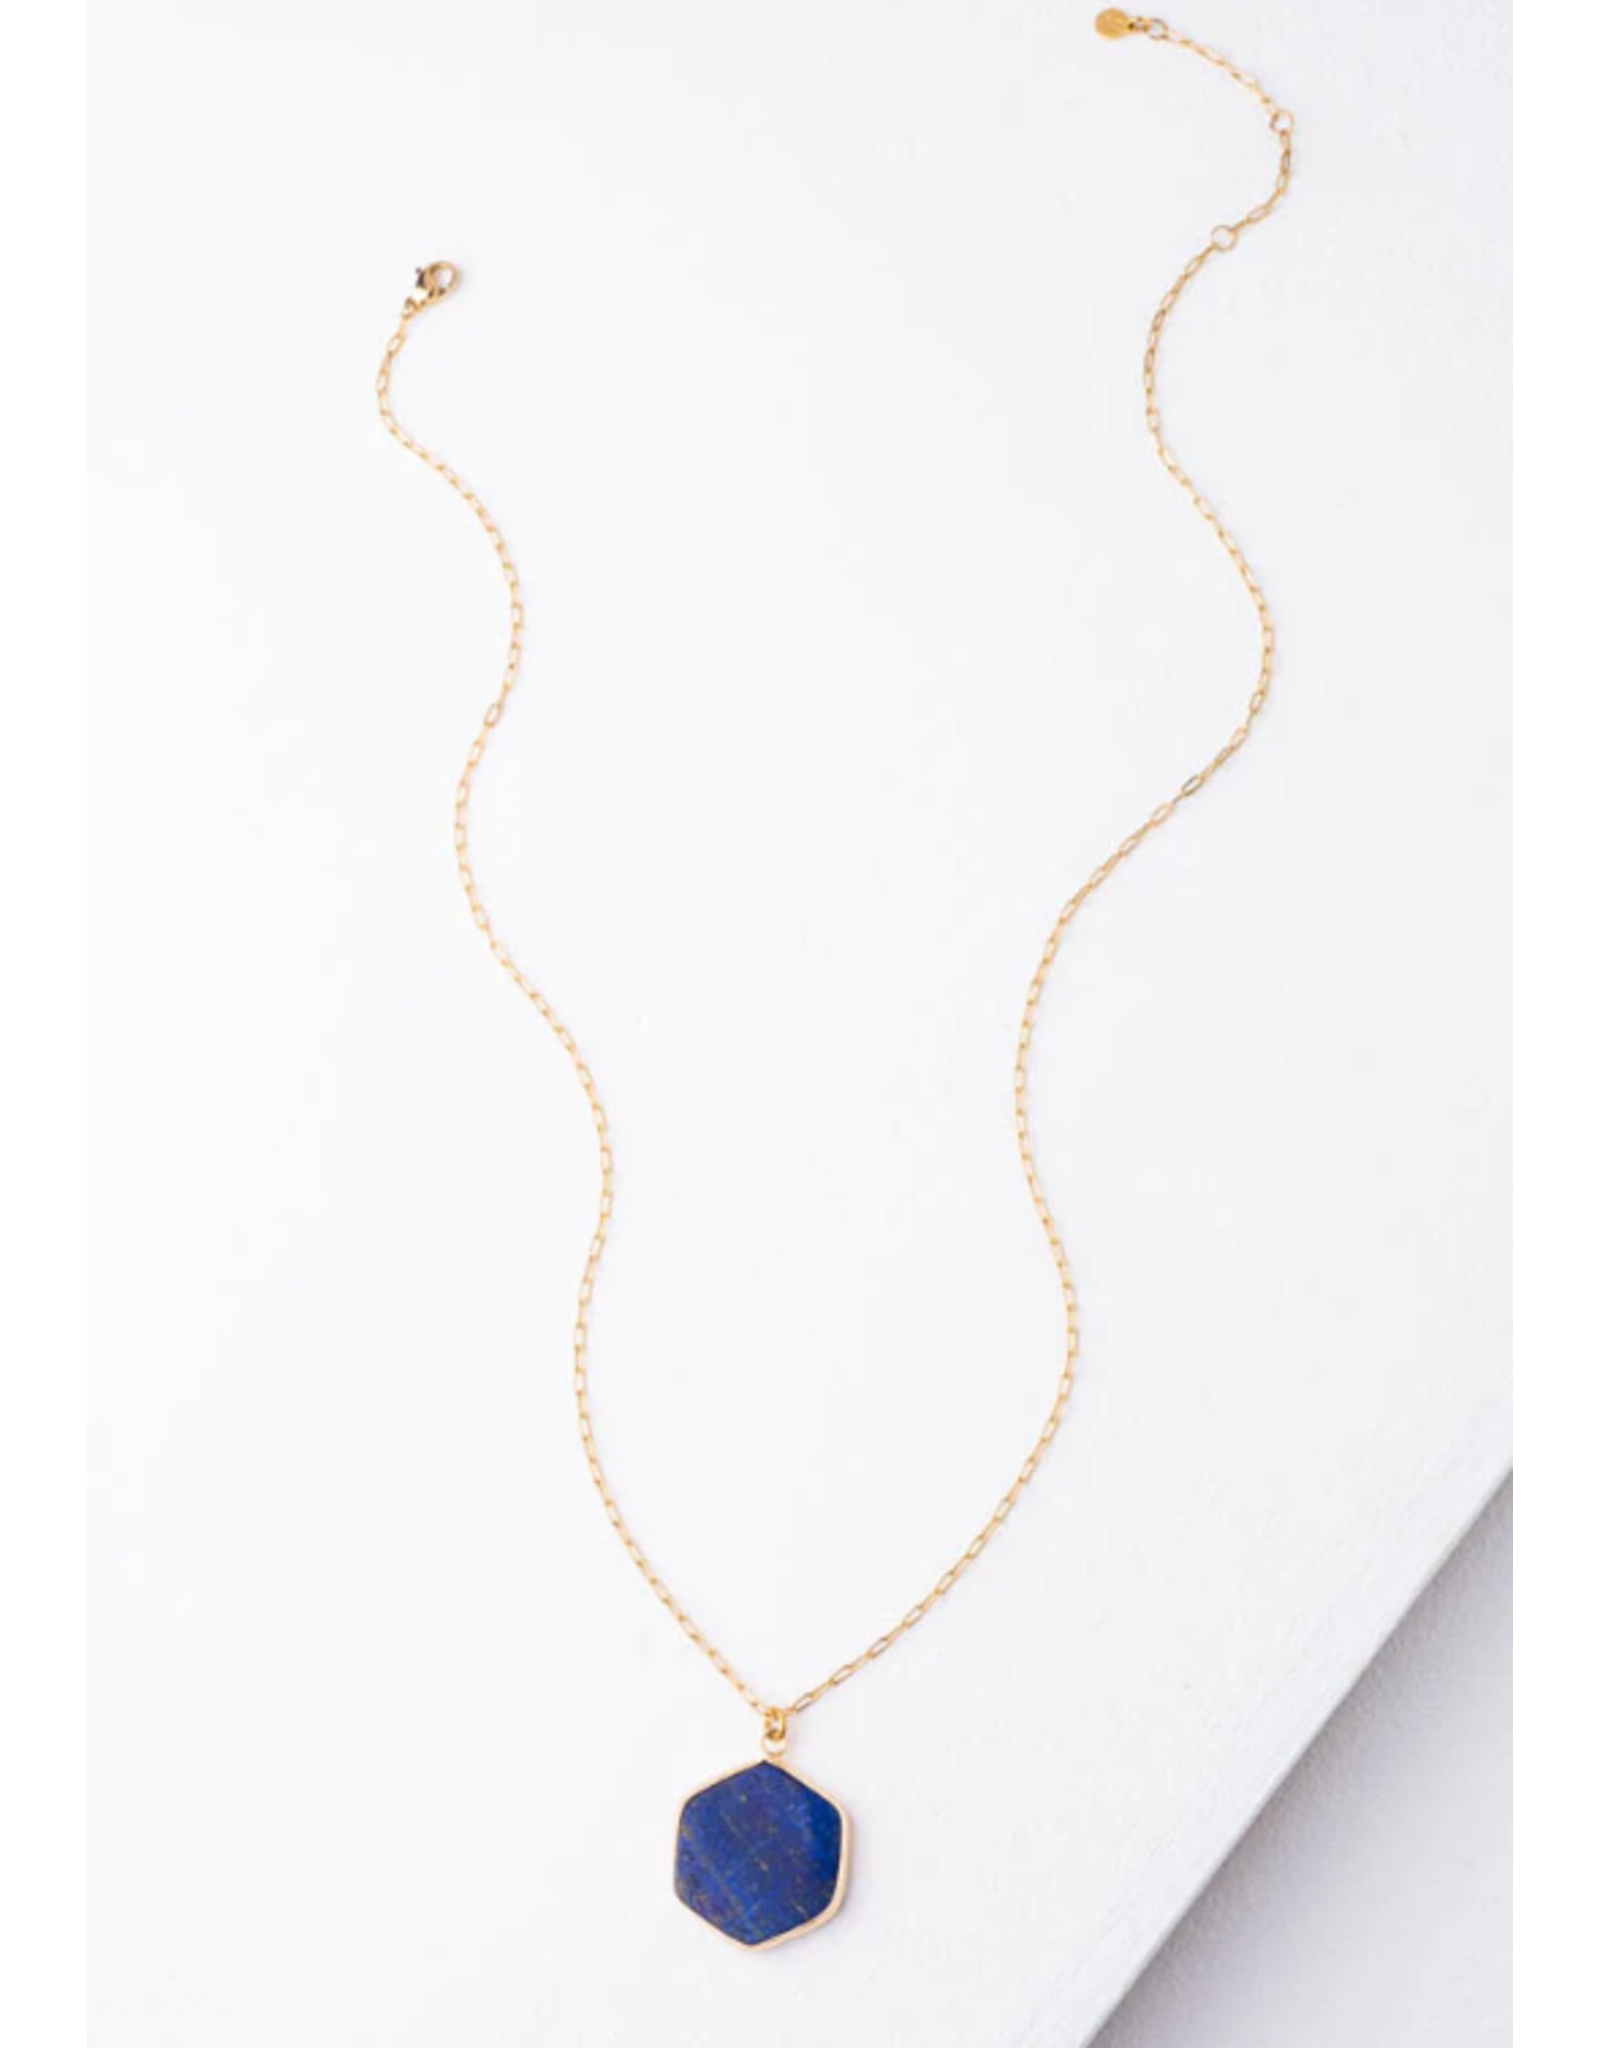 China Stella by Stardust Necklace in Lapis, China